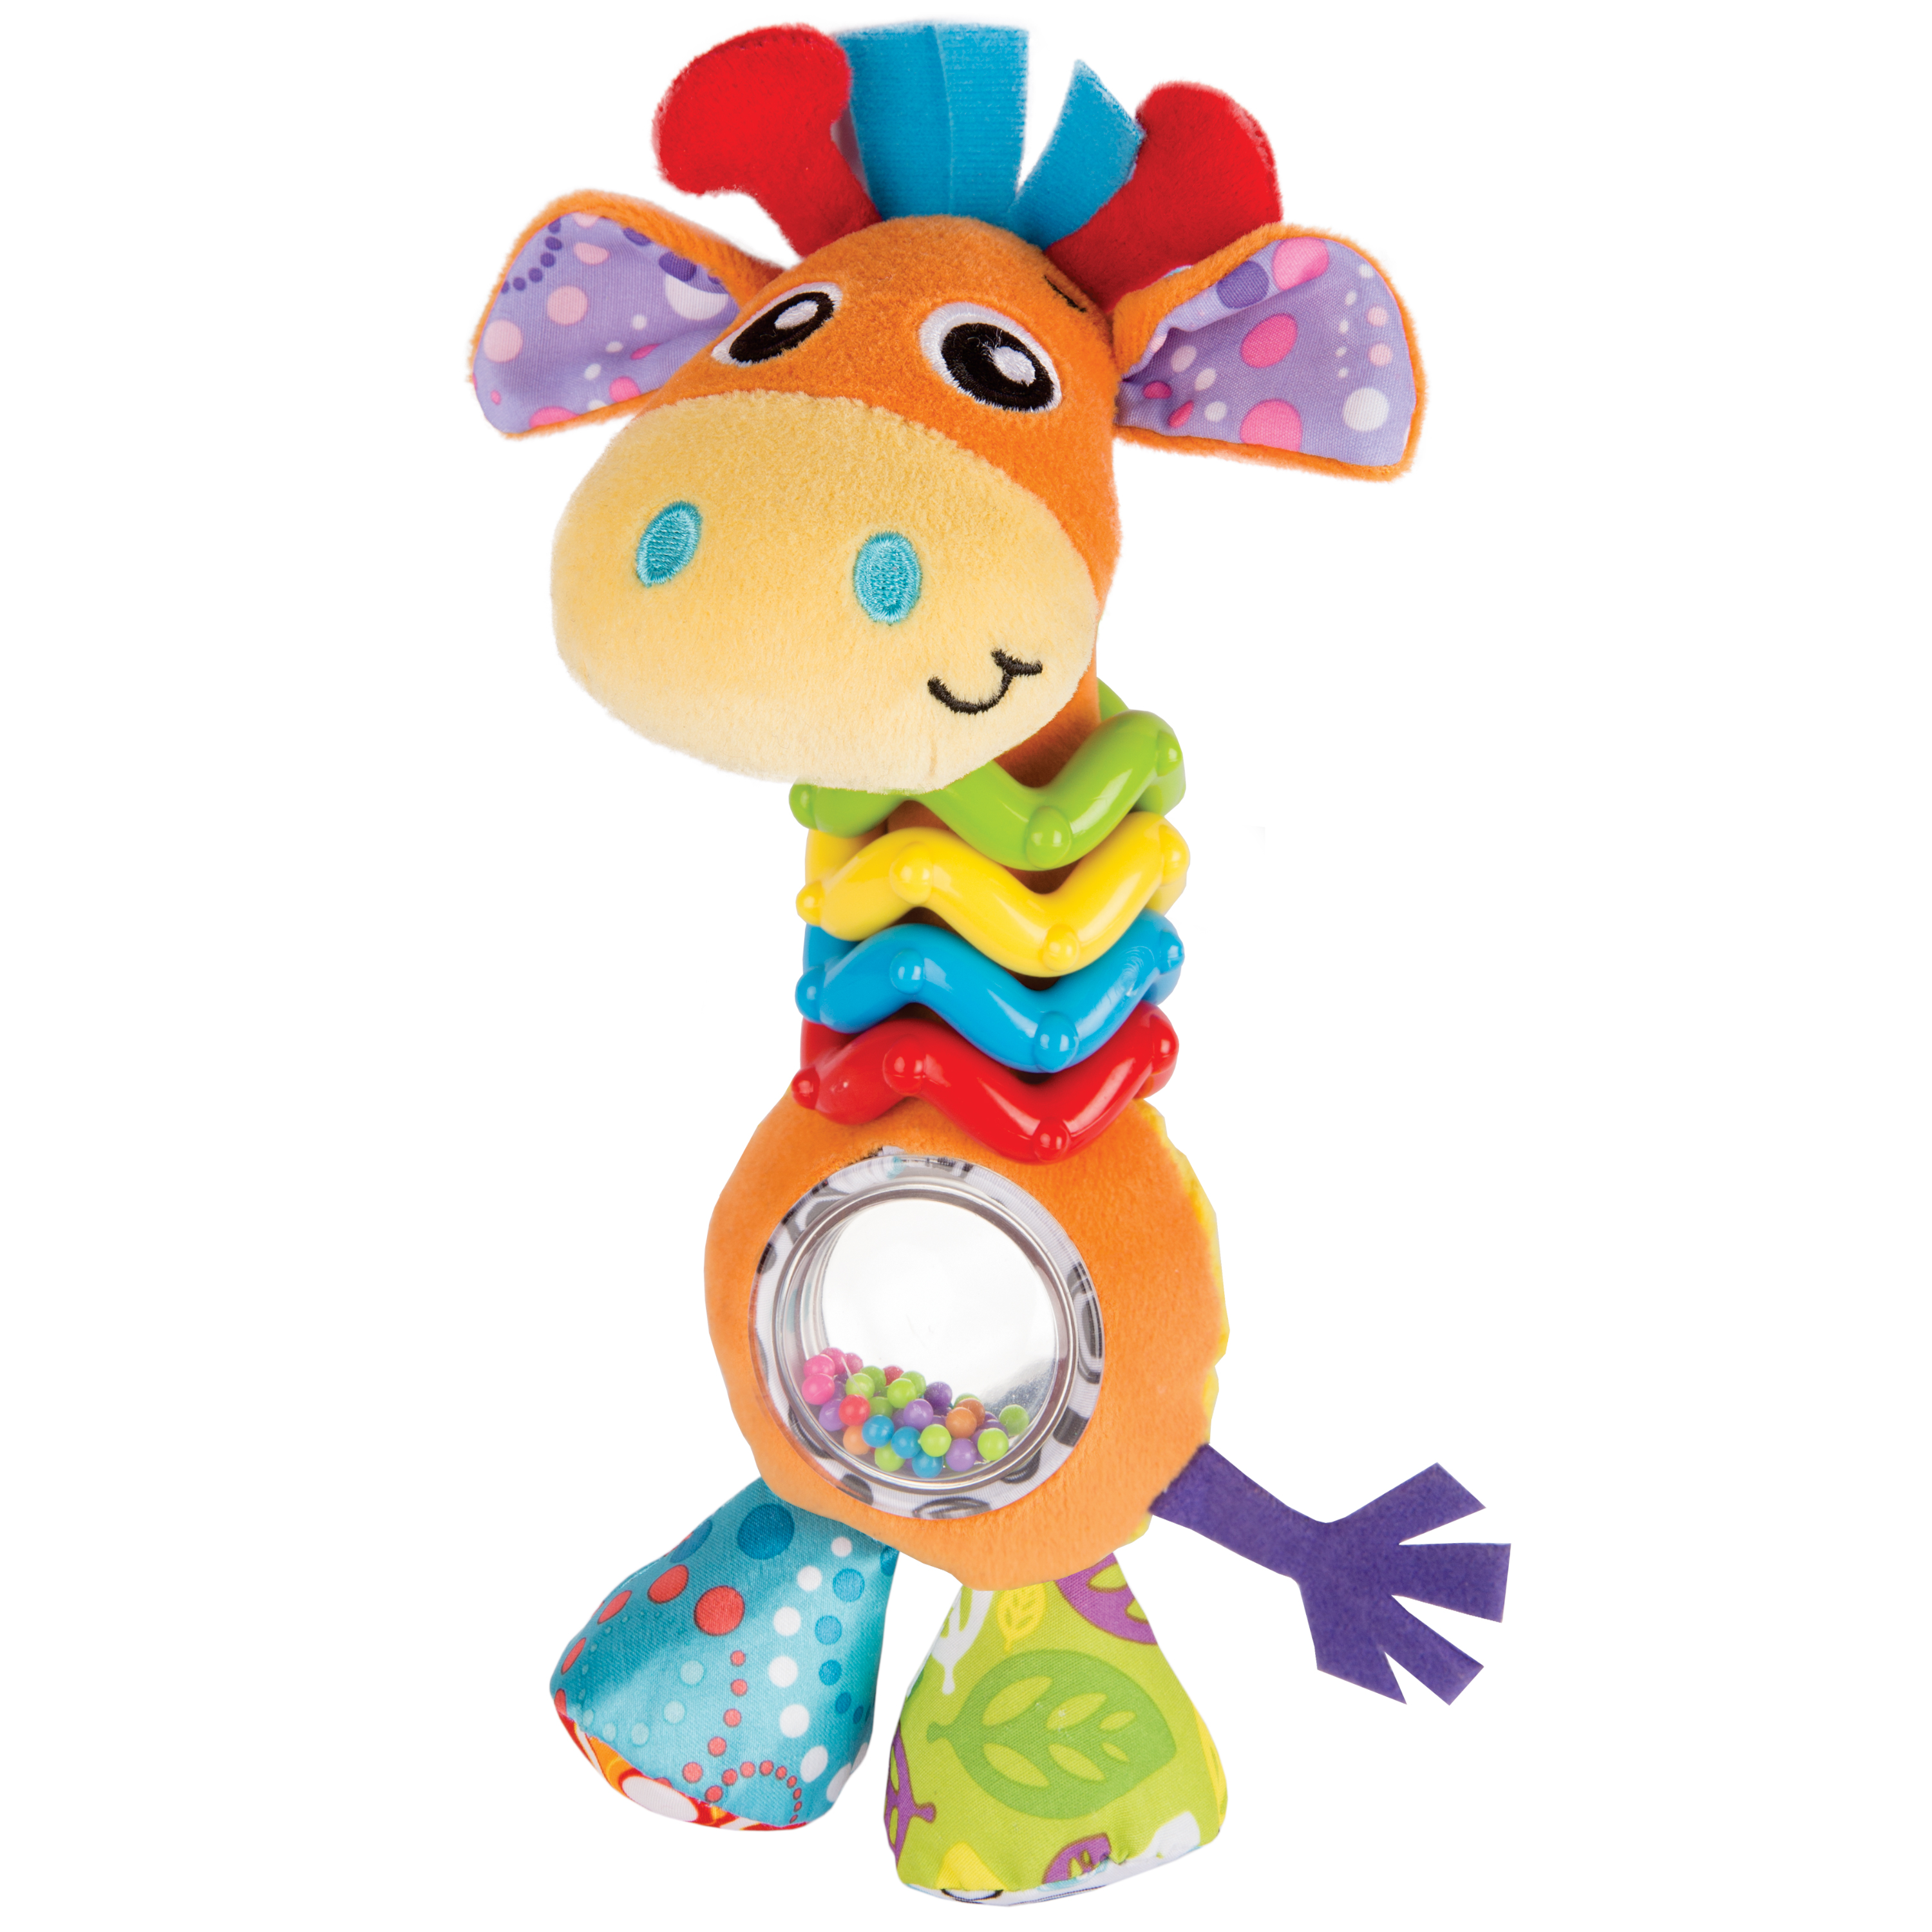 Playgro Bead Buddy Giraffe Baby Rattling and Teething Toy, 3 Months and Up - image 5 of 8